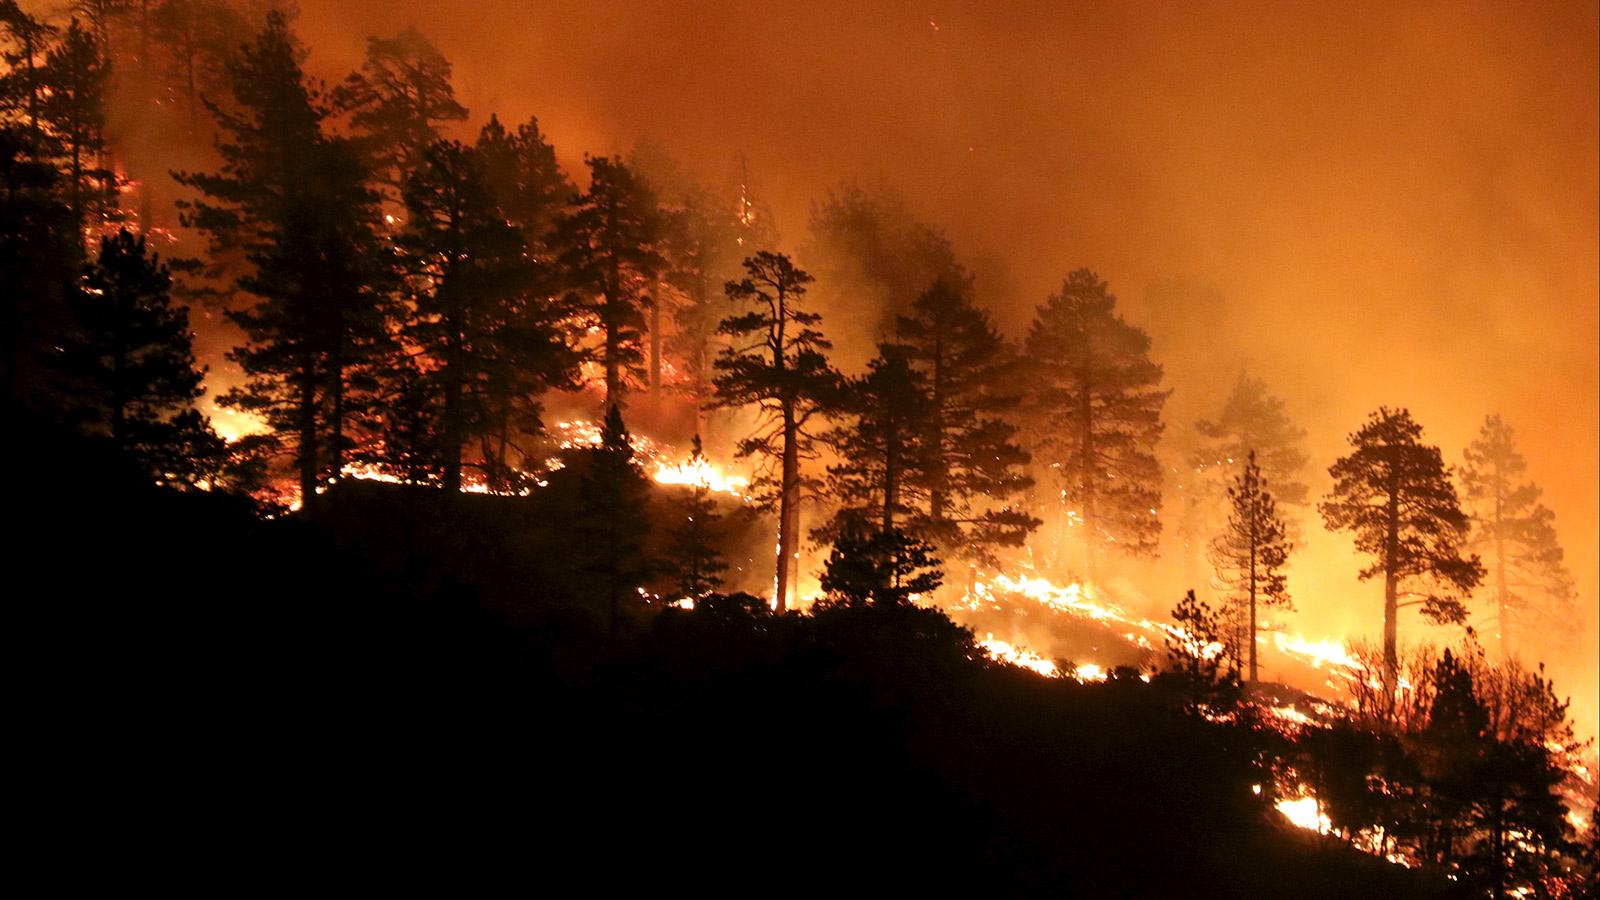 Los Angeles county firefighters battle wild land fire call the Pine Fire in Wrightwood, California July 17, 2015.